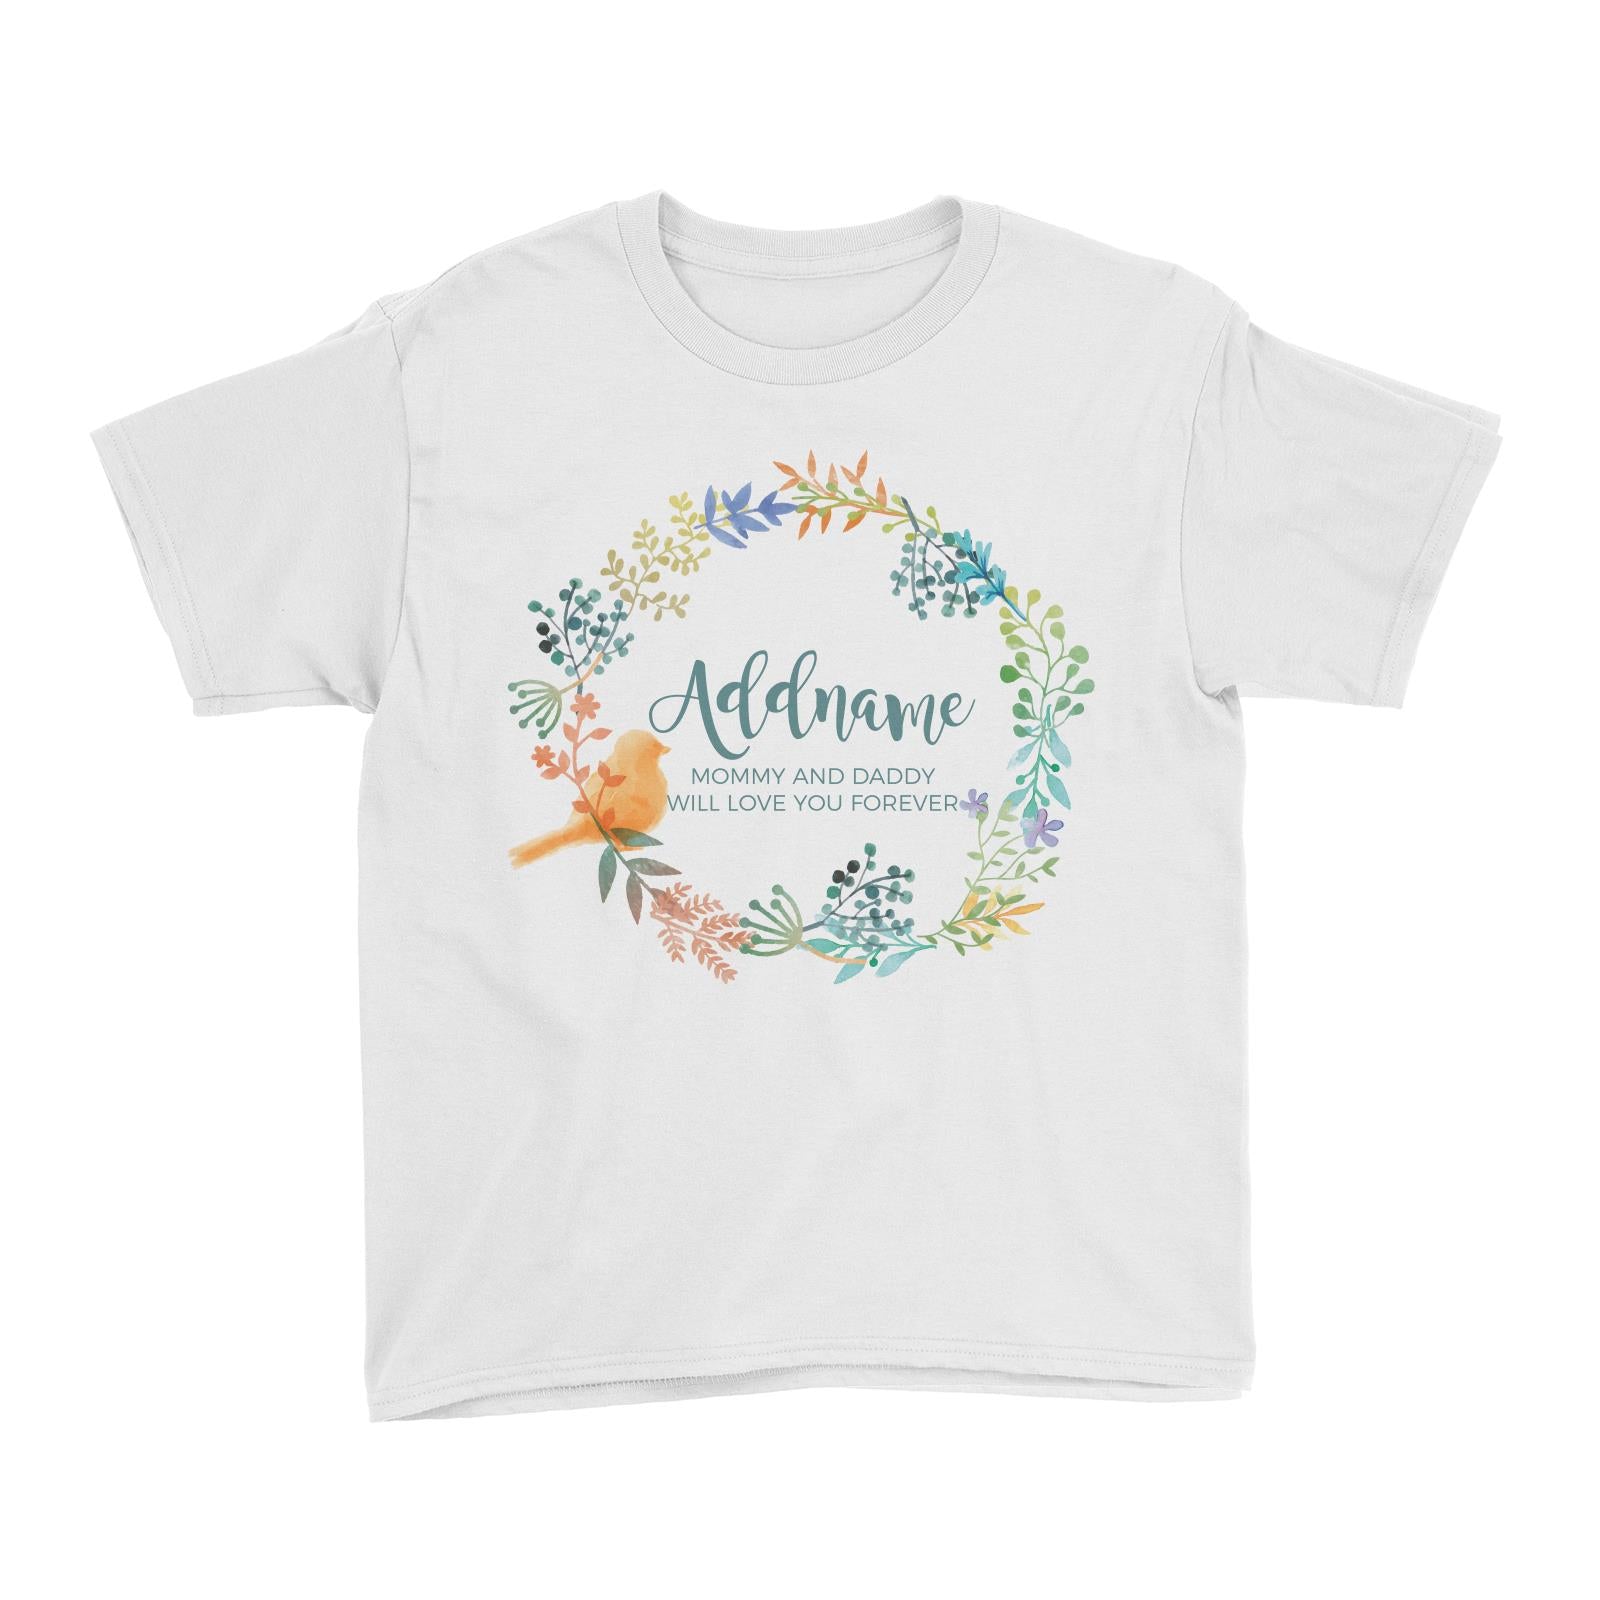 Spring Flower with Bird Wreath Personalizable with Name and Text Kid's T-Shirt